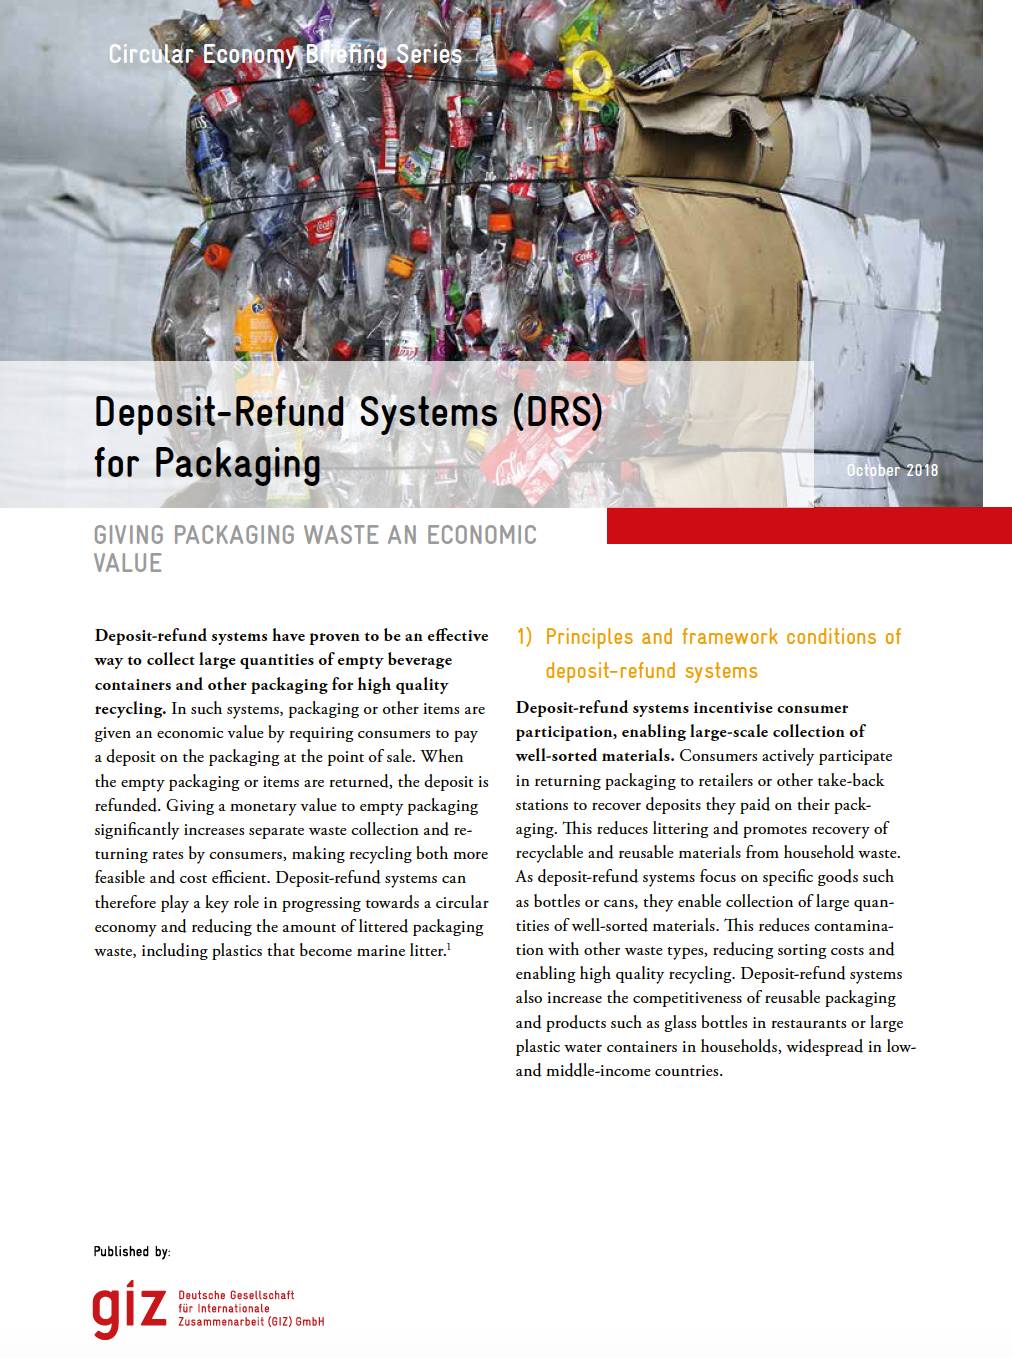 Deposit-Refund Systems (DRS) for Packaging